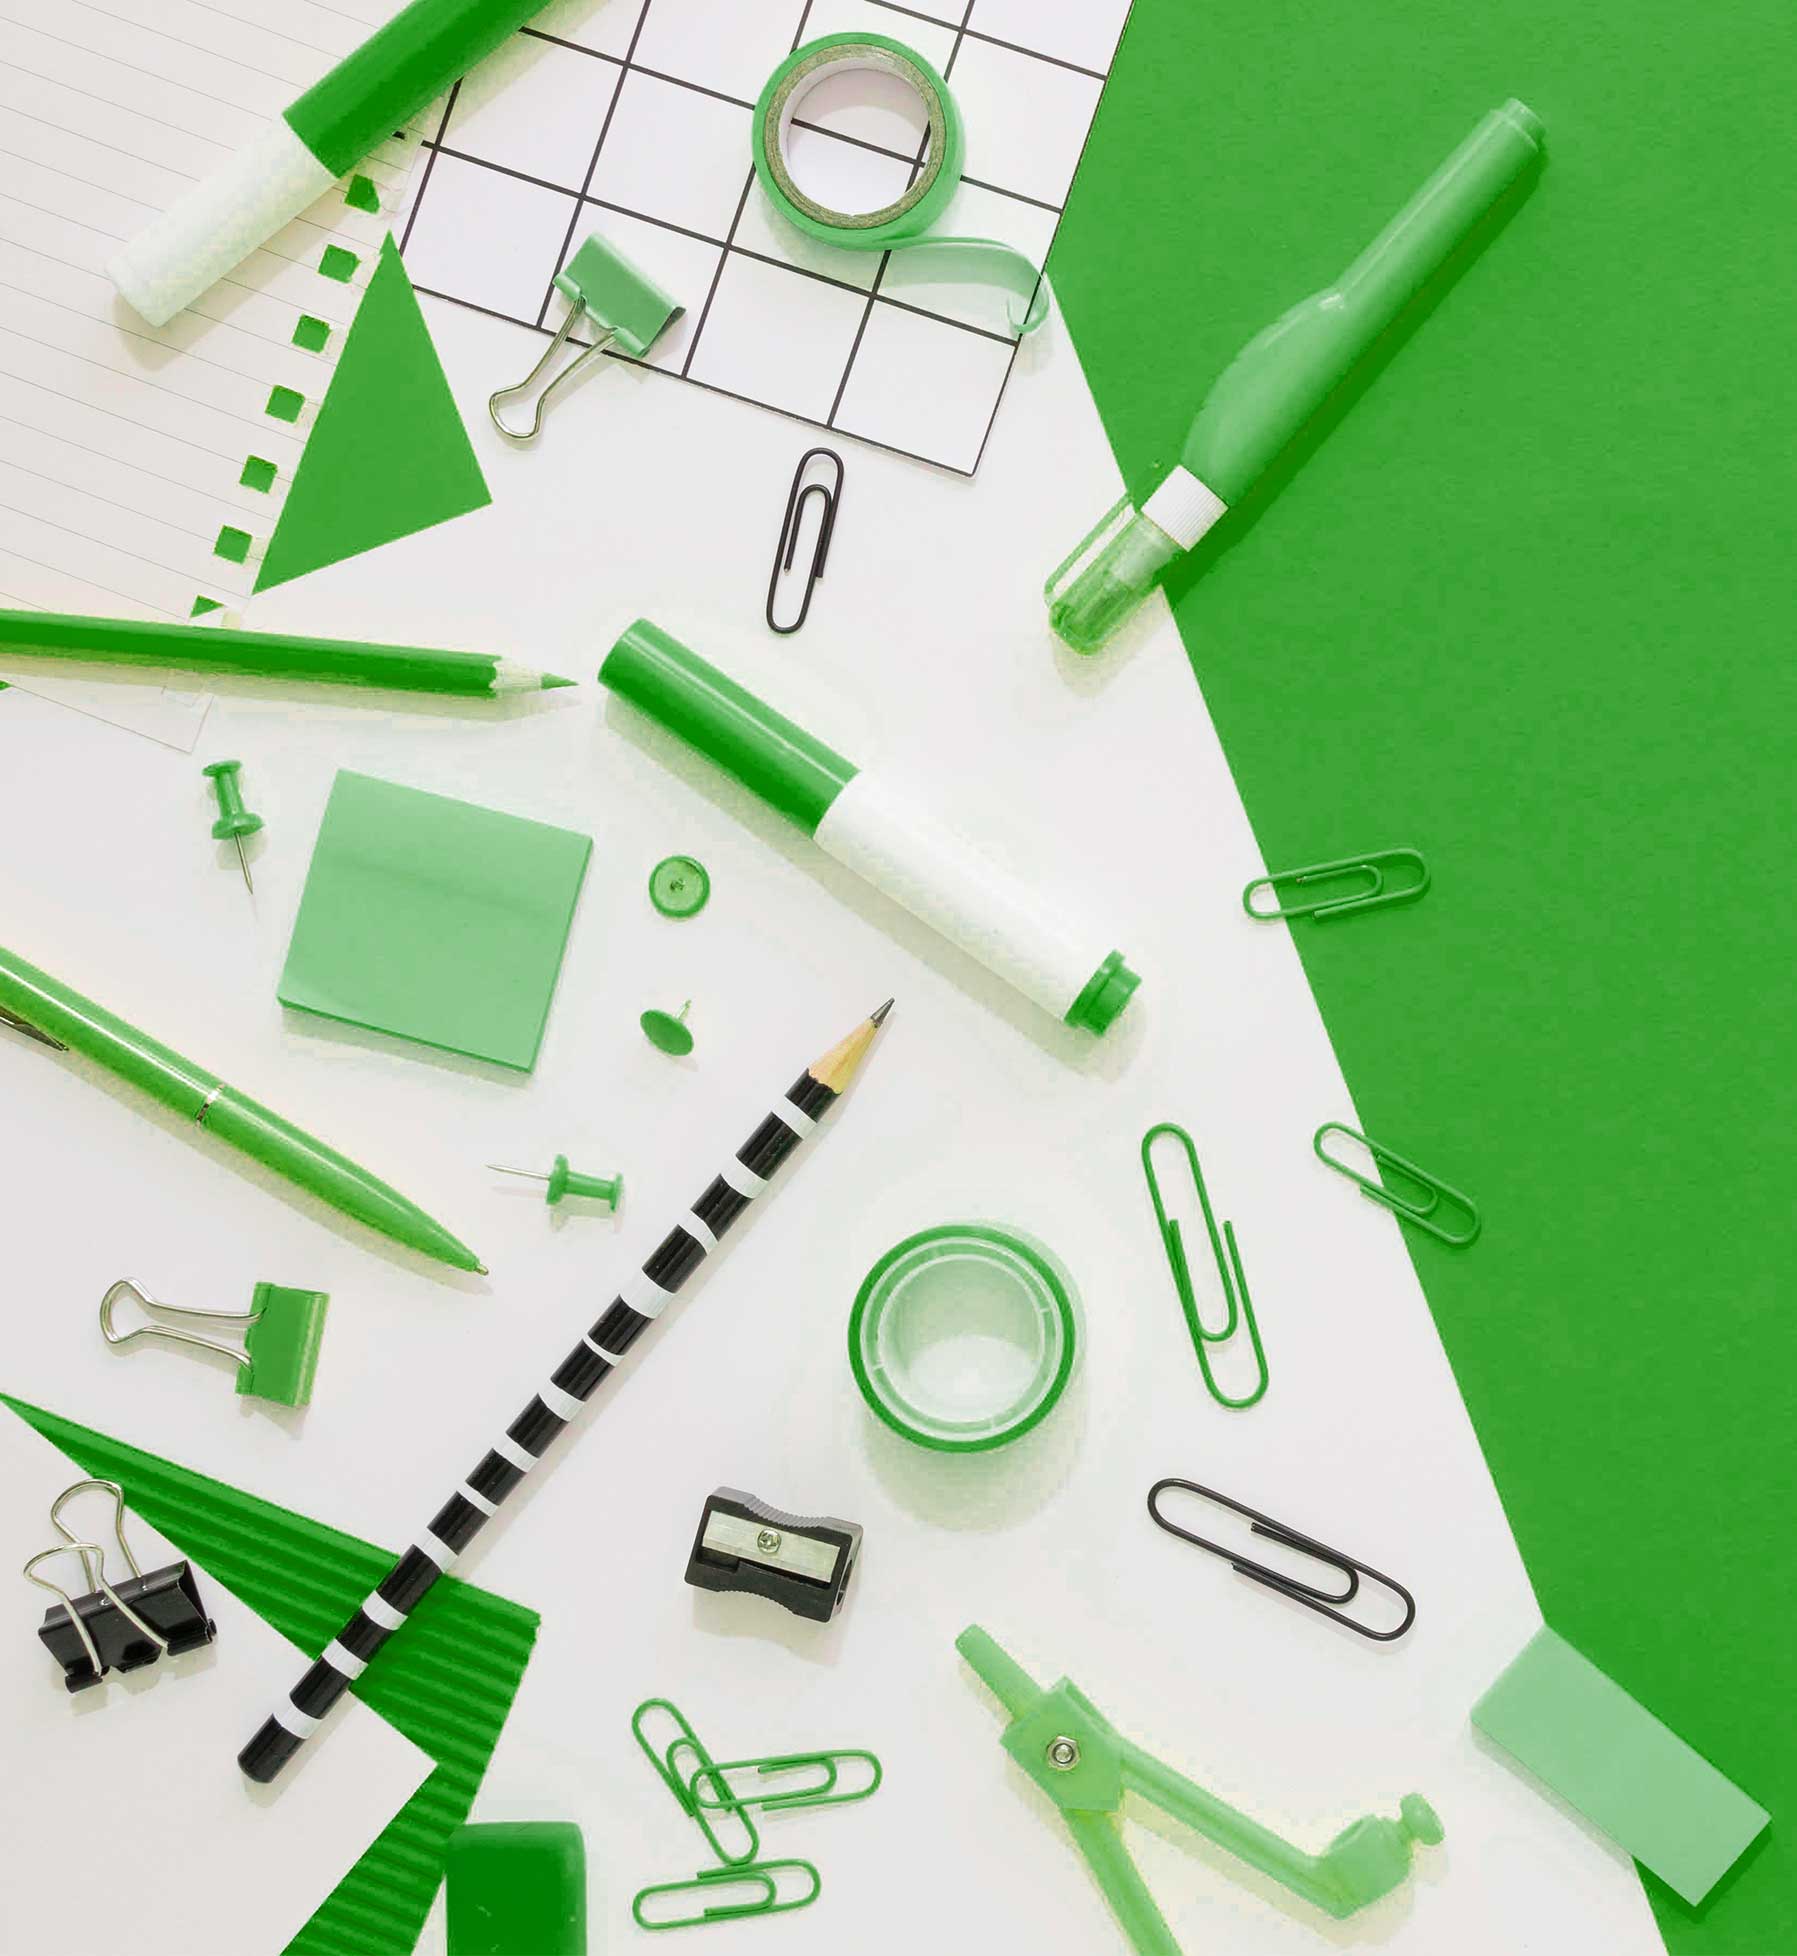 Should you use green as your brand colour? The Template Emporium